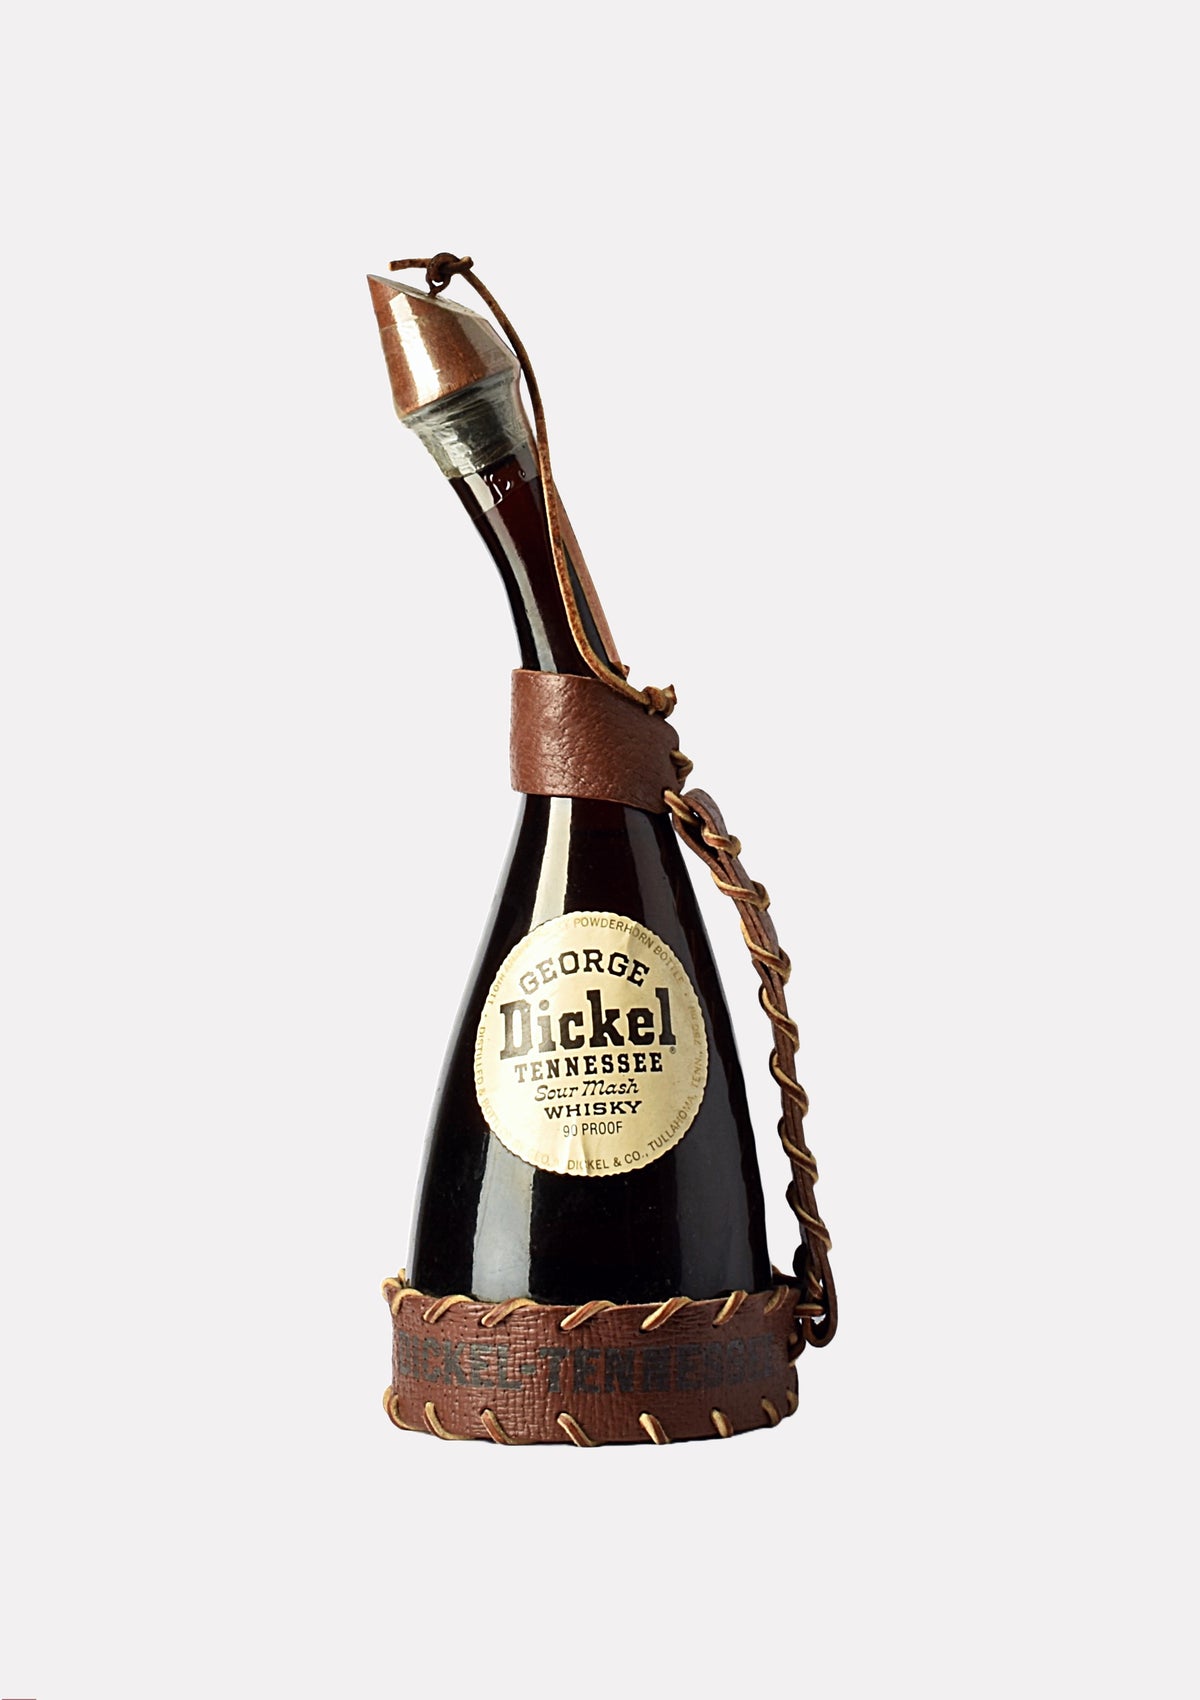 George Dickel Tennessee Whisky 110th Anniversary